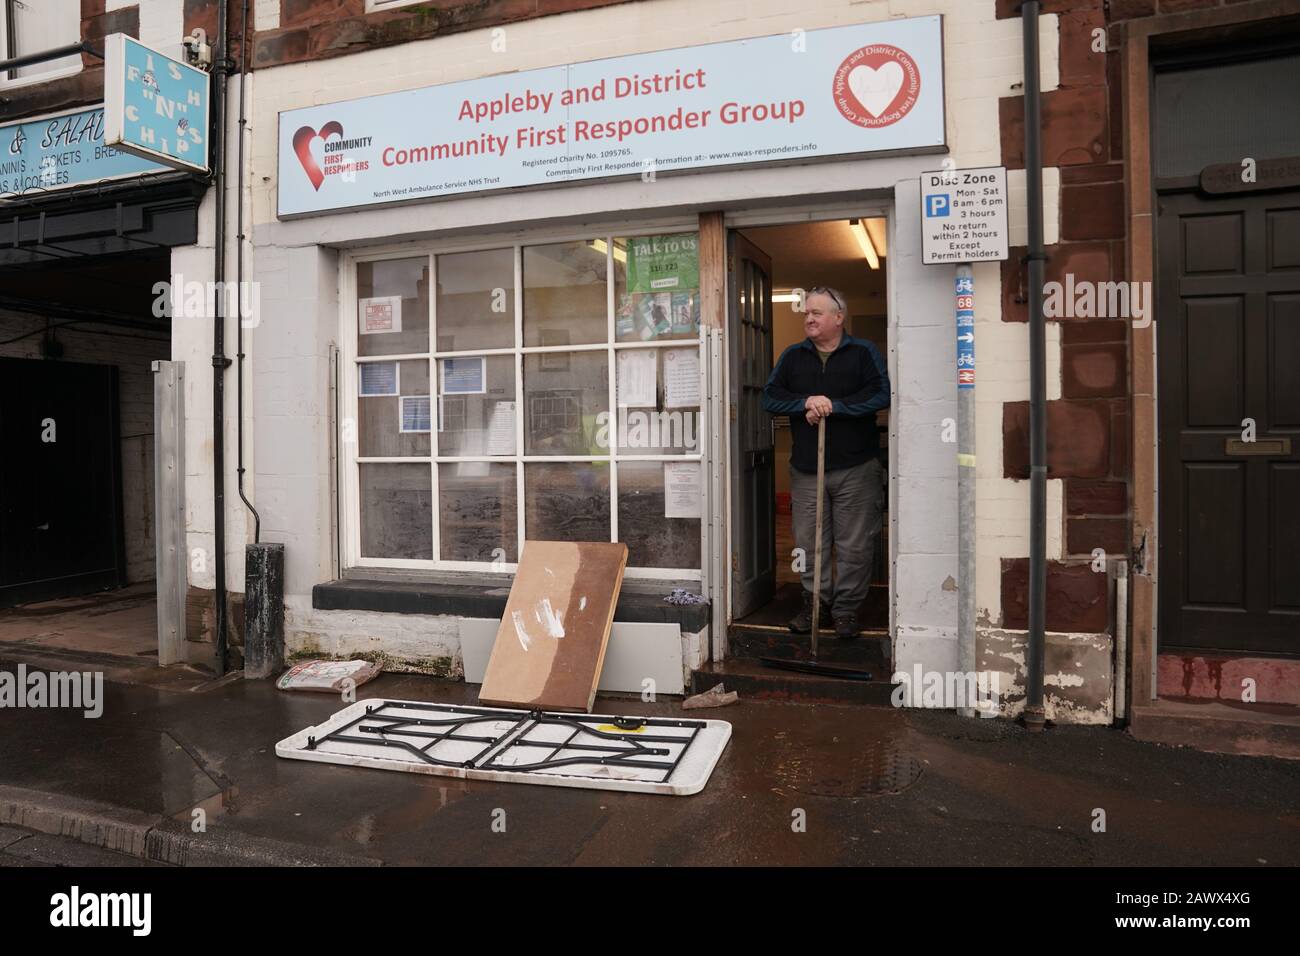 Keith Bainbridge, 66, a volunteer for North West Ambulance Service, cleans up the Appleby and District Community First Responder Group premises in Appleby-in-Westmorland, Cumbria, in the aftermath of Storm Ciara which lashed the country Sunday. Stock Photo